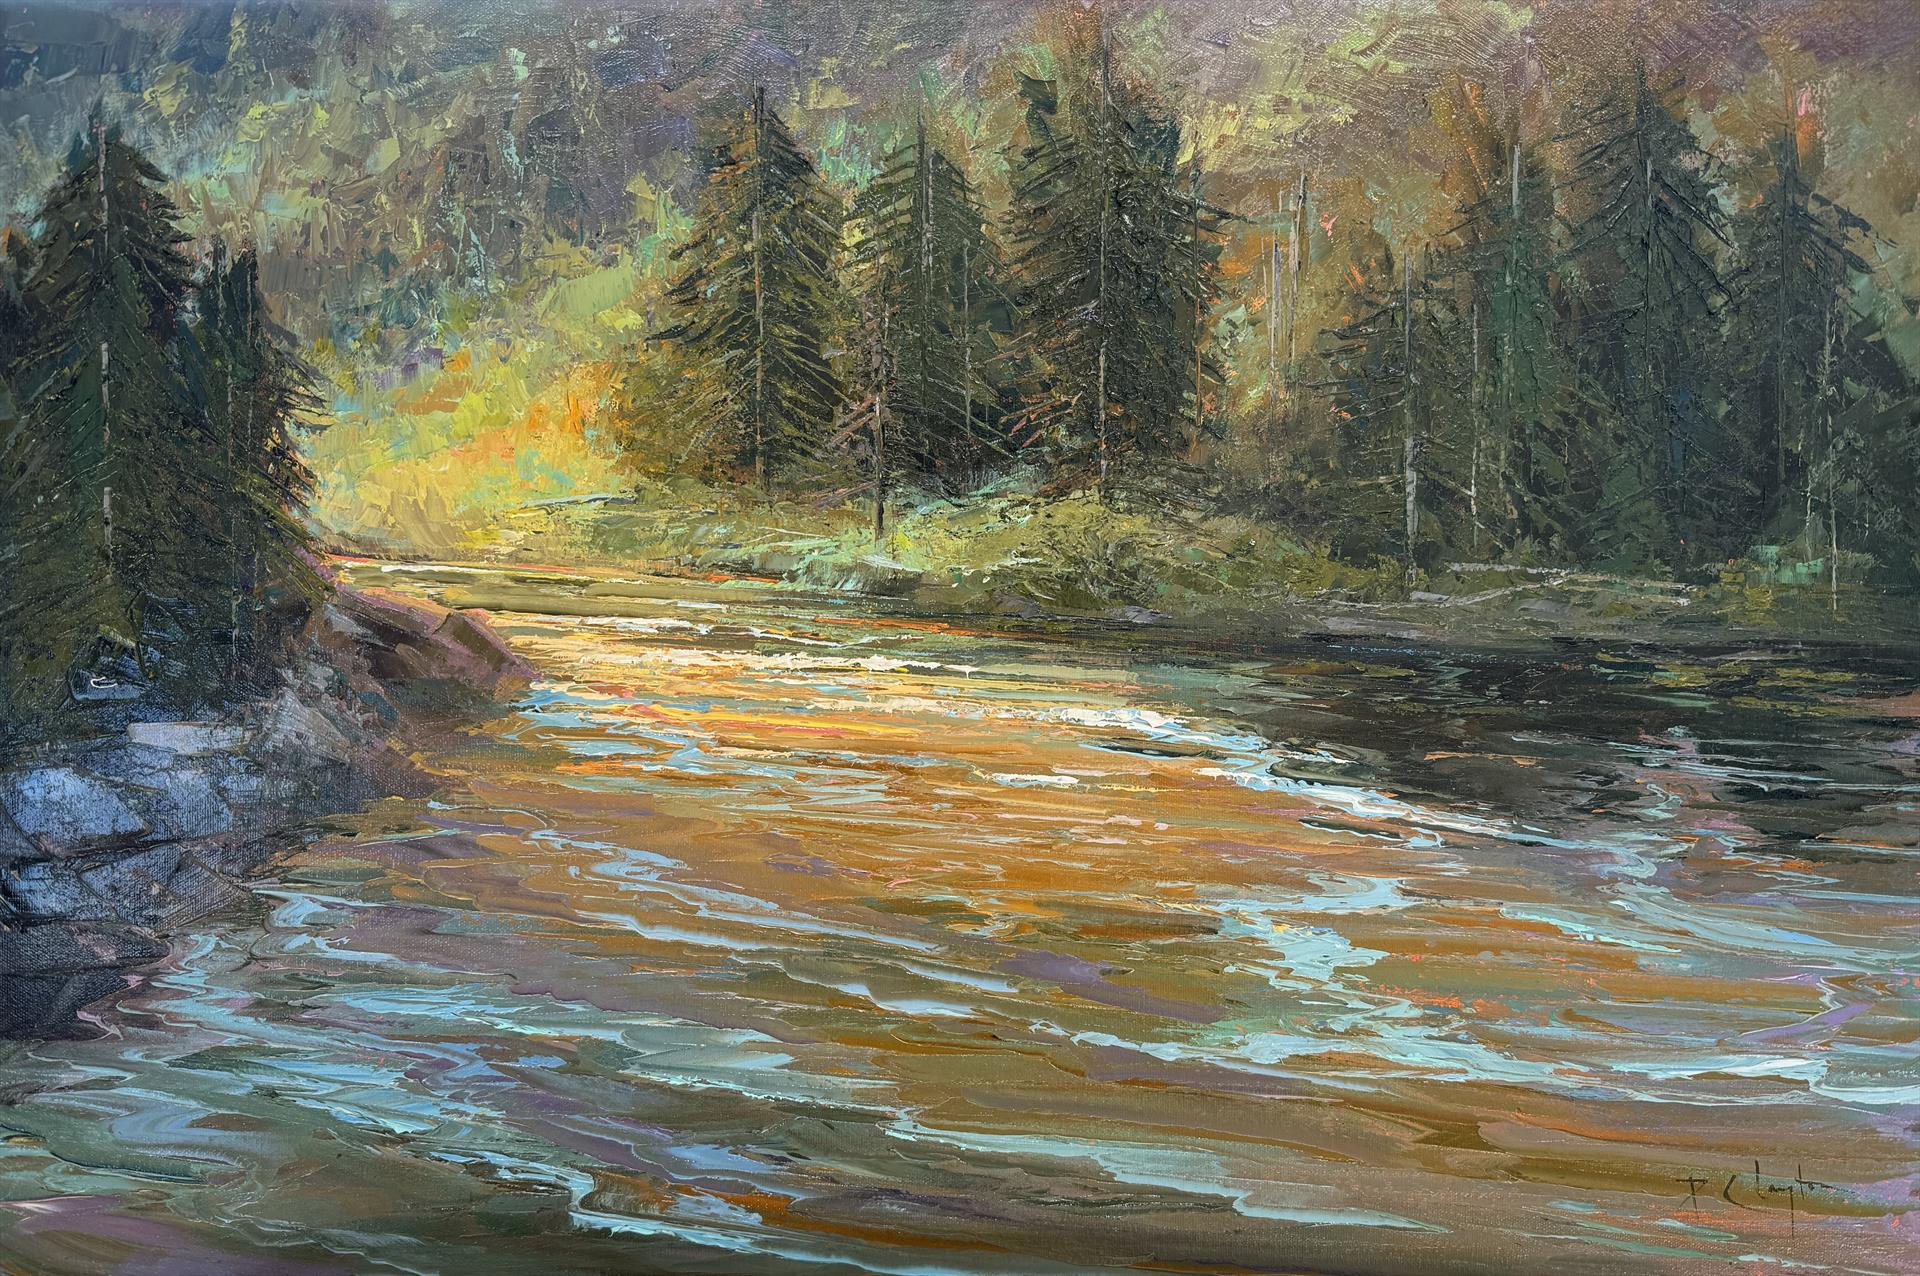 Pat Clayton, "Sunrise in Tumwater Canyon," oil, 20 x 30 in.